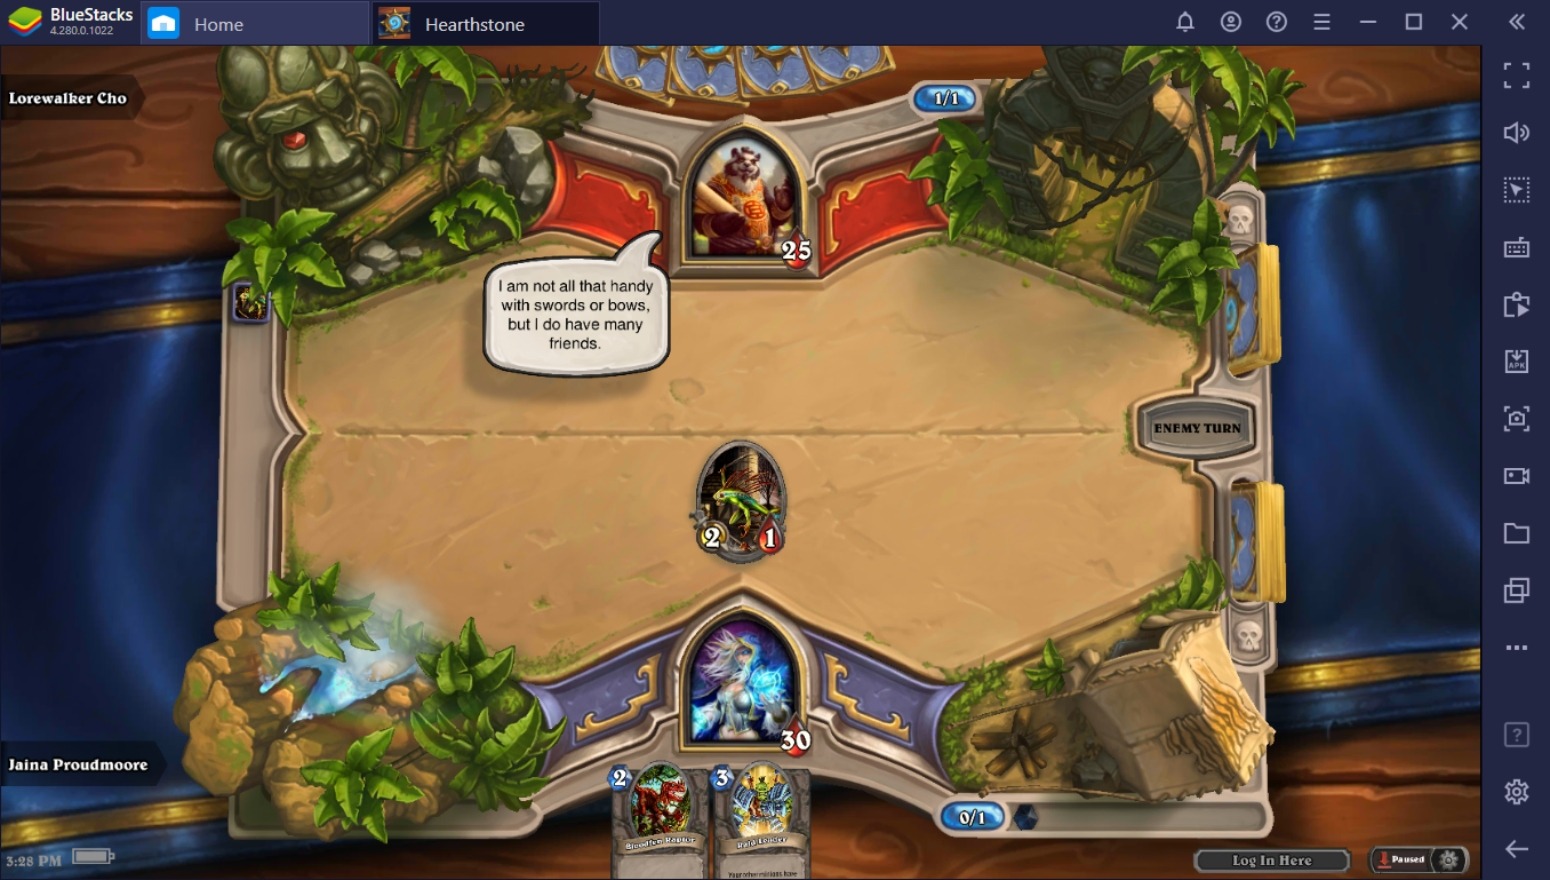 How to Play Heartwood Online on PC with BlueStacks